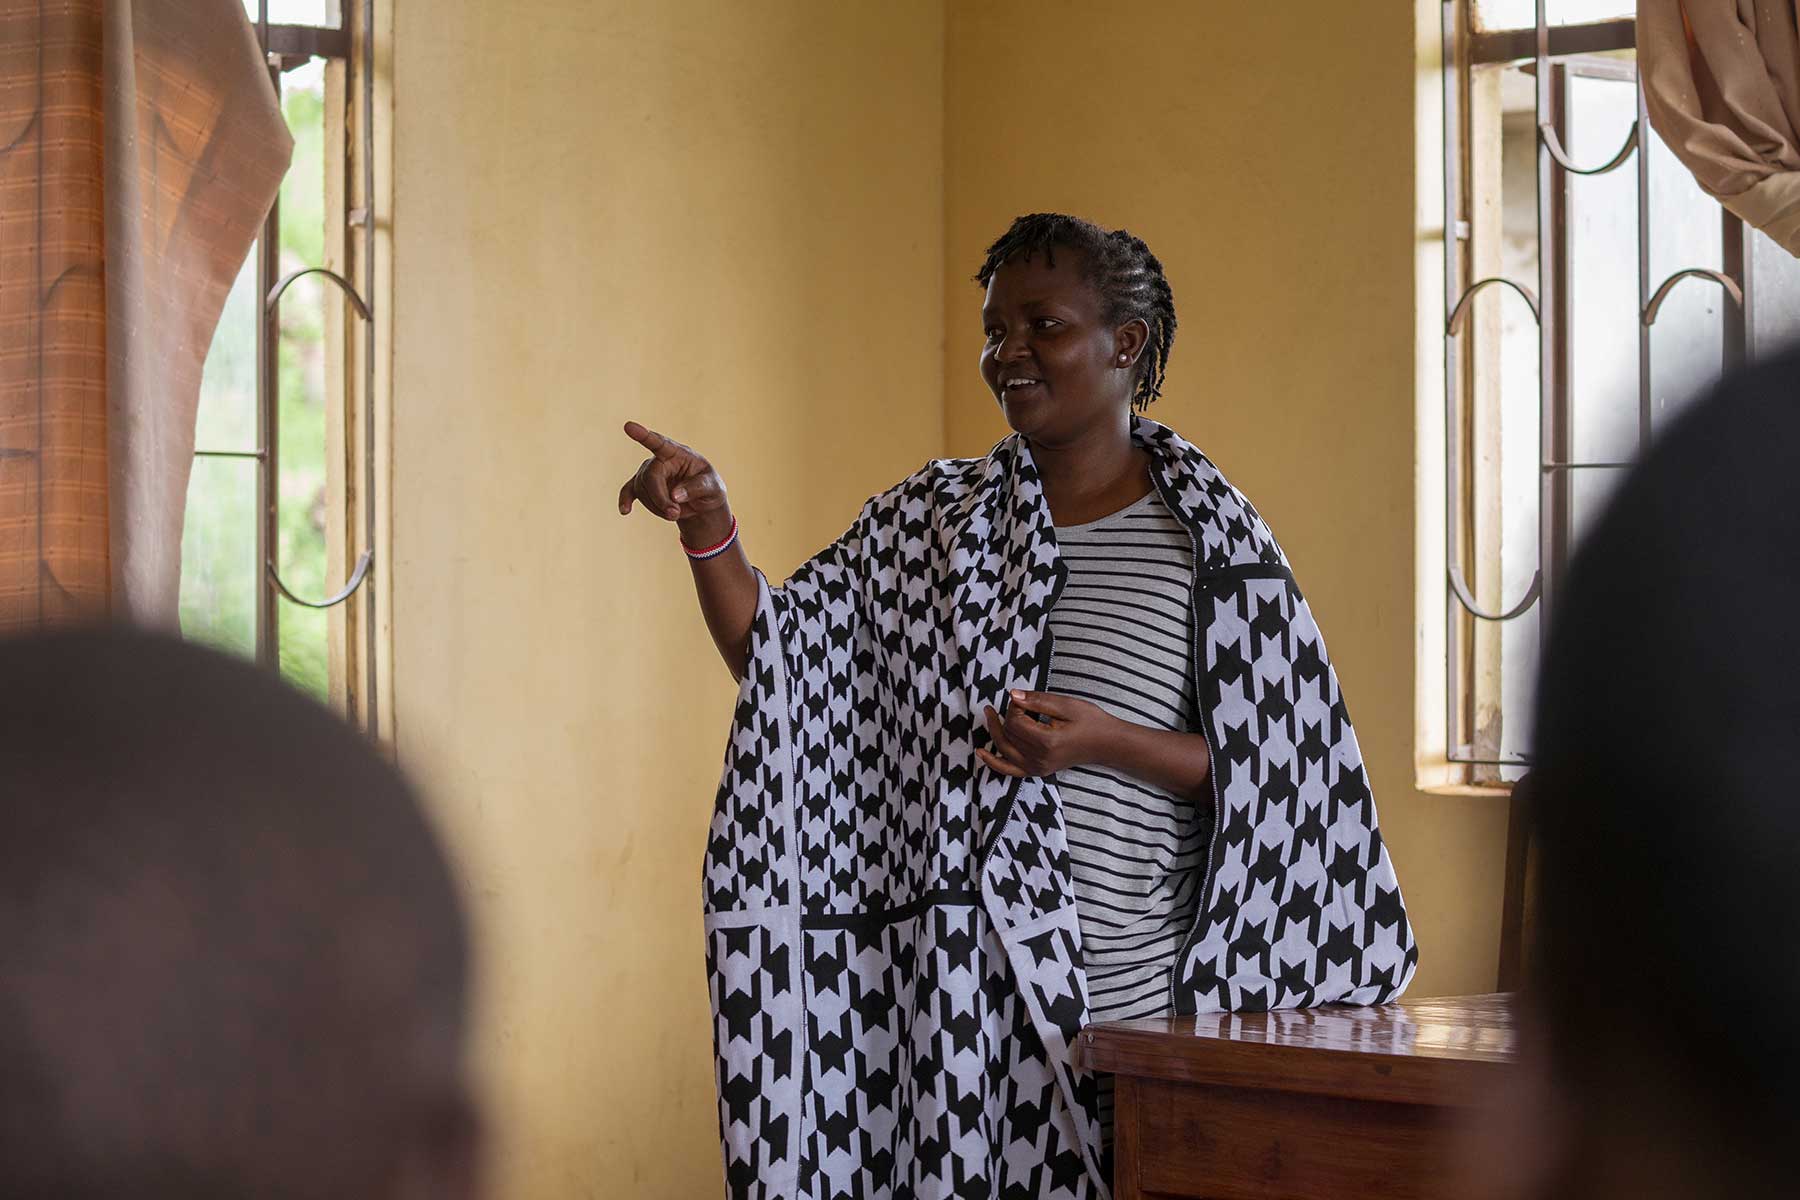 a black woman wearing black and white patterned clothing speaking to other people in a room